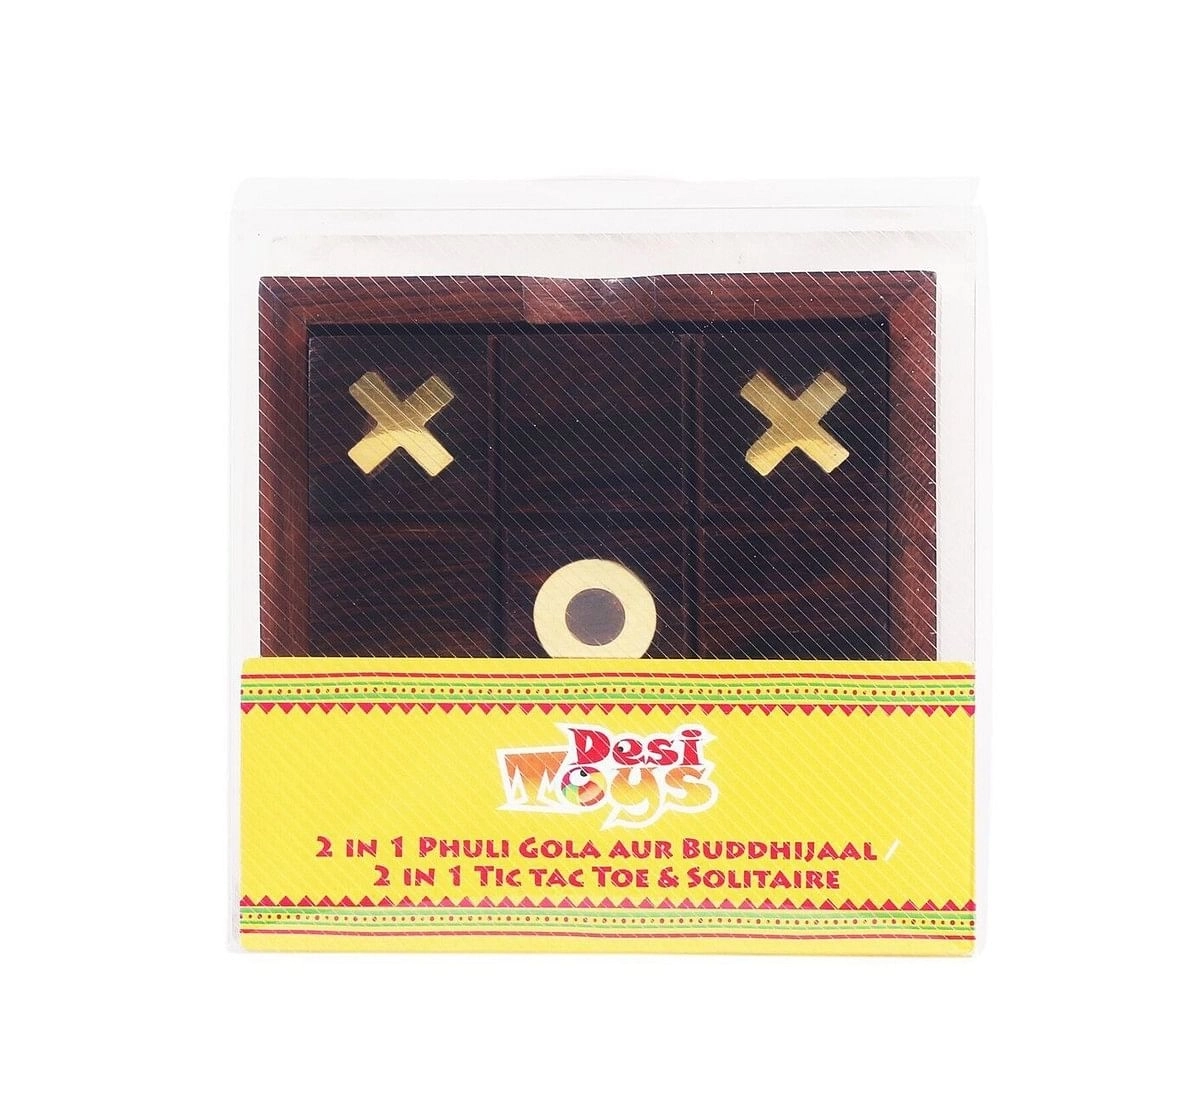 Desi Toys 2 In 1 Solitaire & Tic Tac Toe Game In Wood, Phuli Gola Aur Buddhijaal for Kids age 5Y+ (Brown)